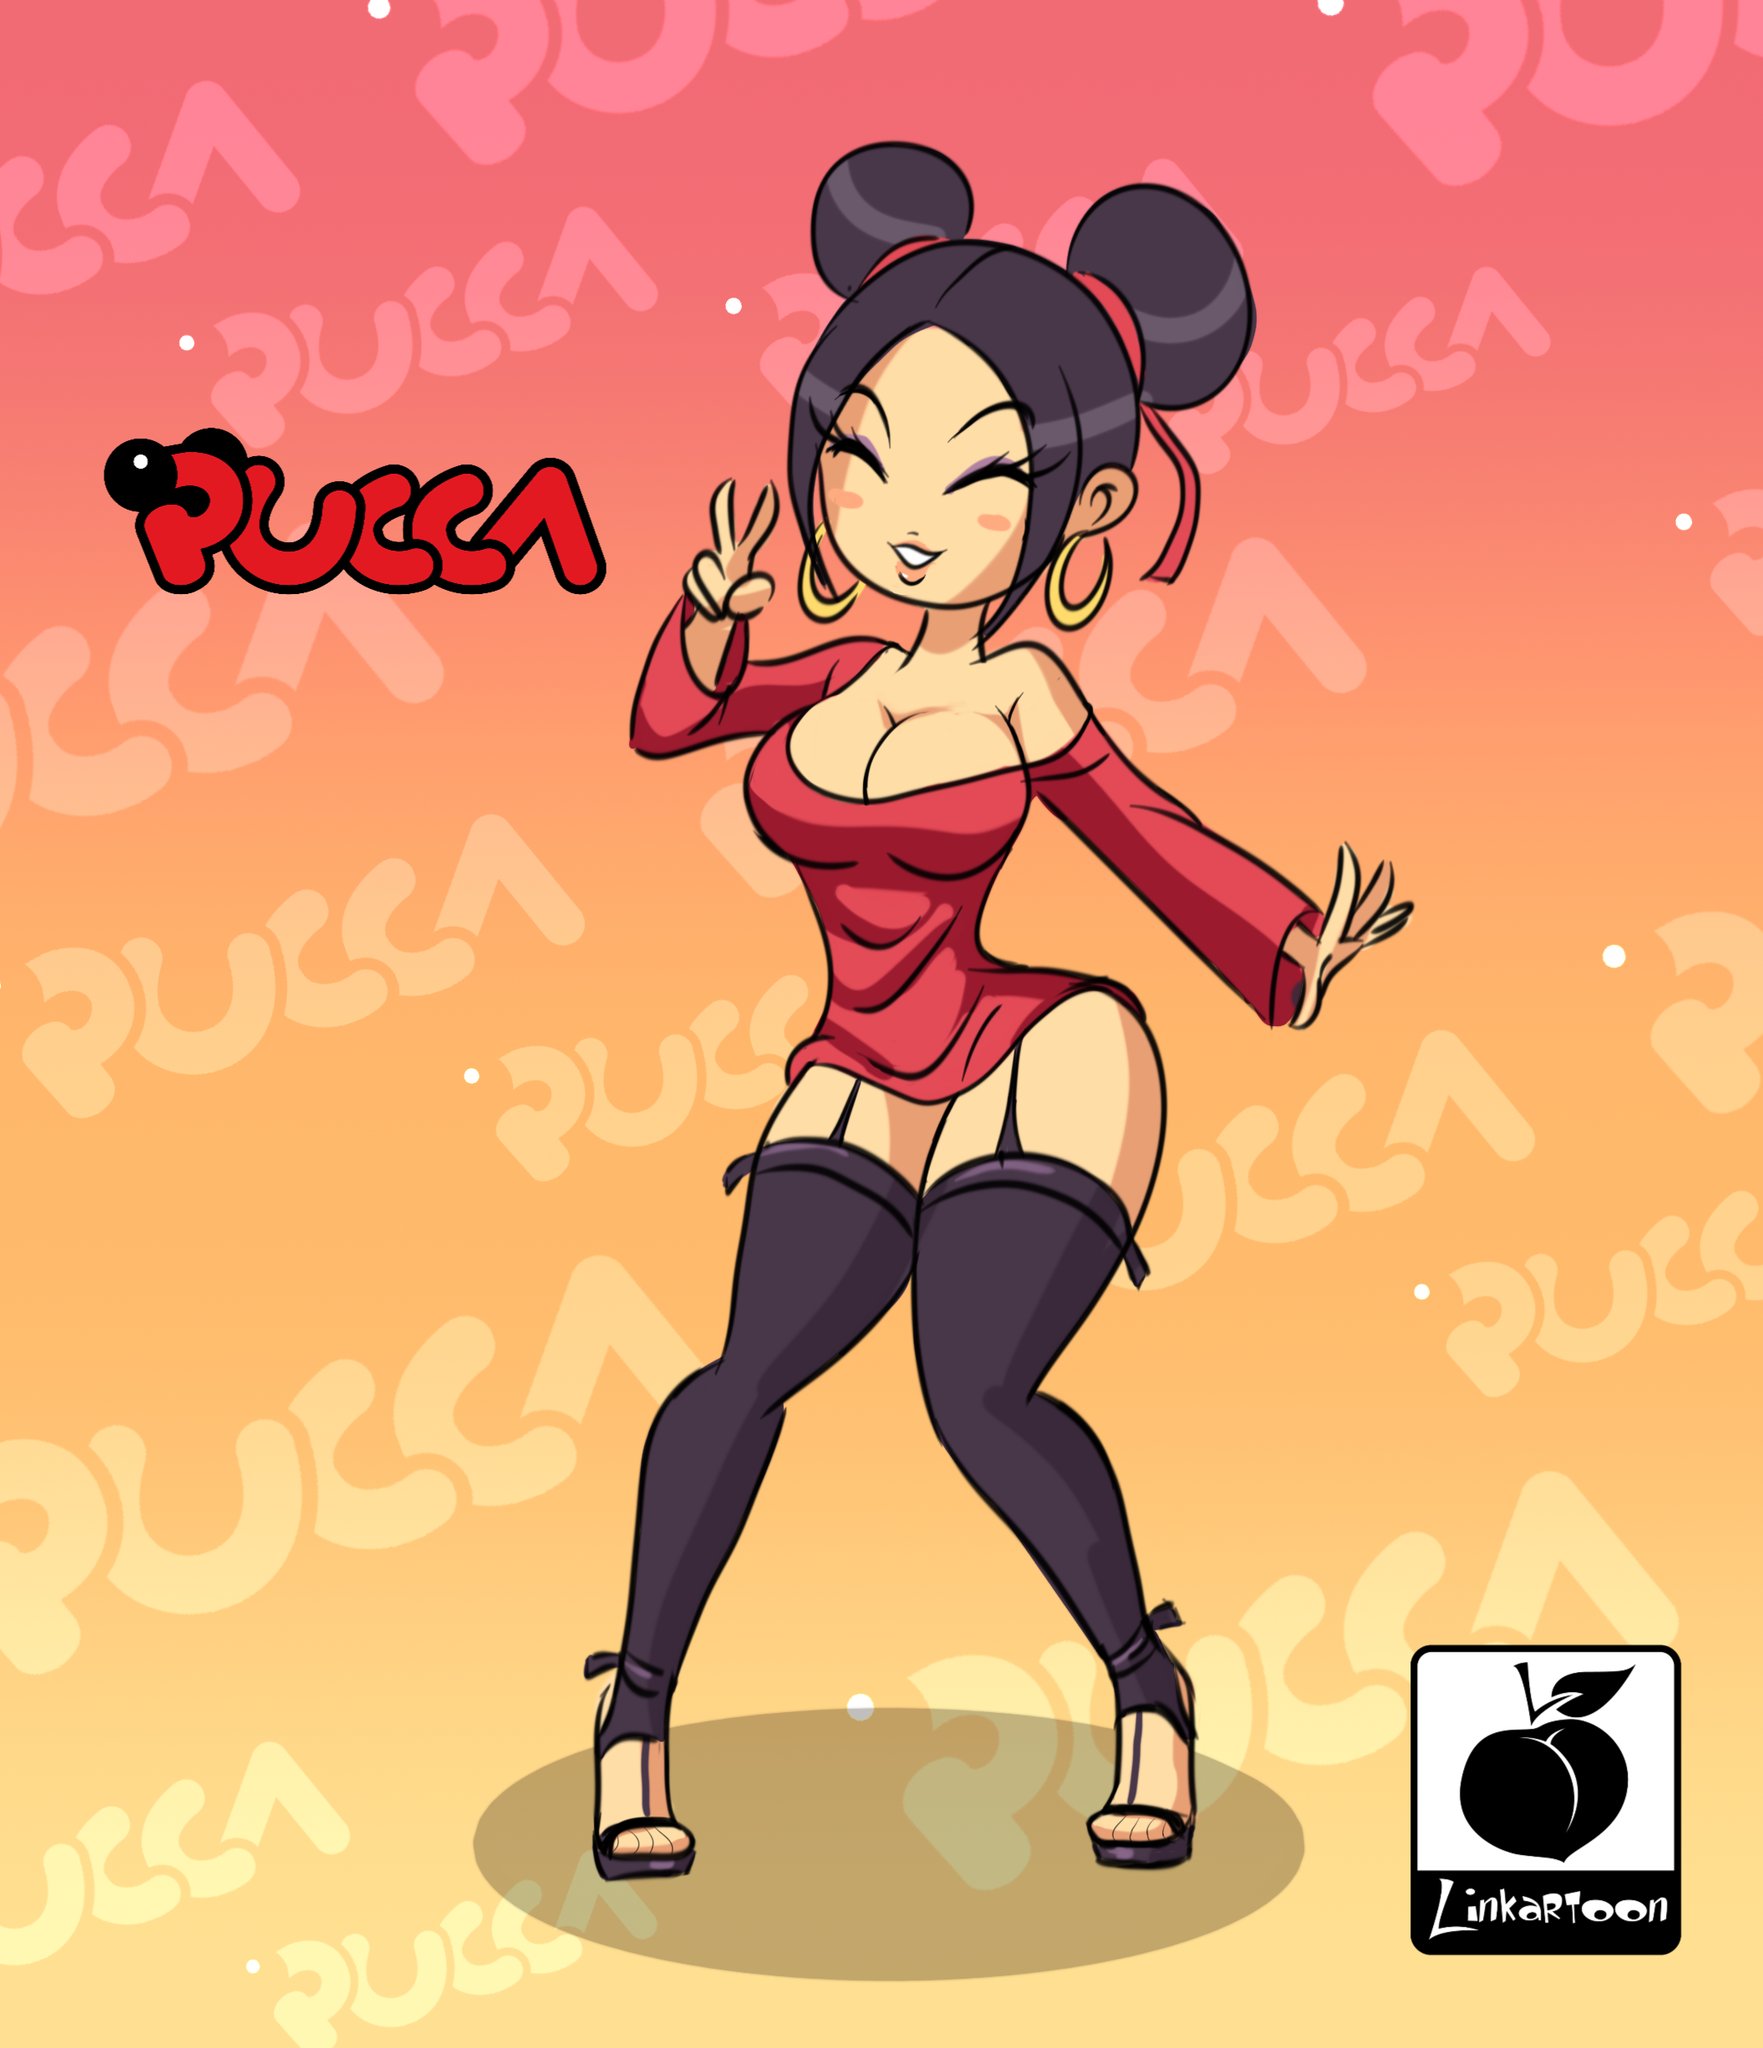 Linkartoon 🍑 on Twitter: "Apparently Pucca is on Netflix, so